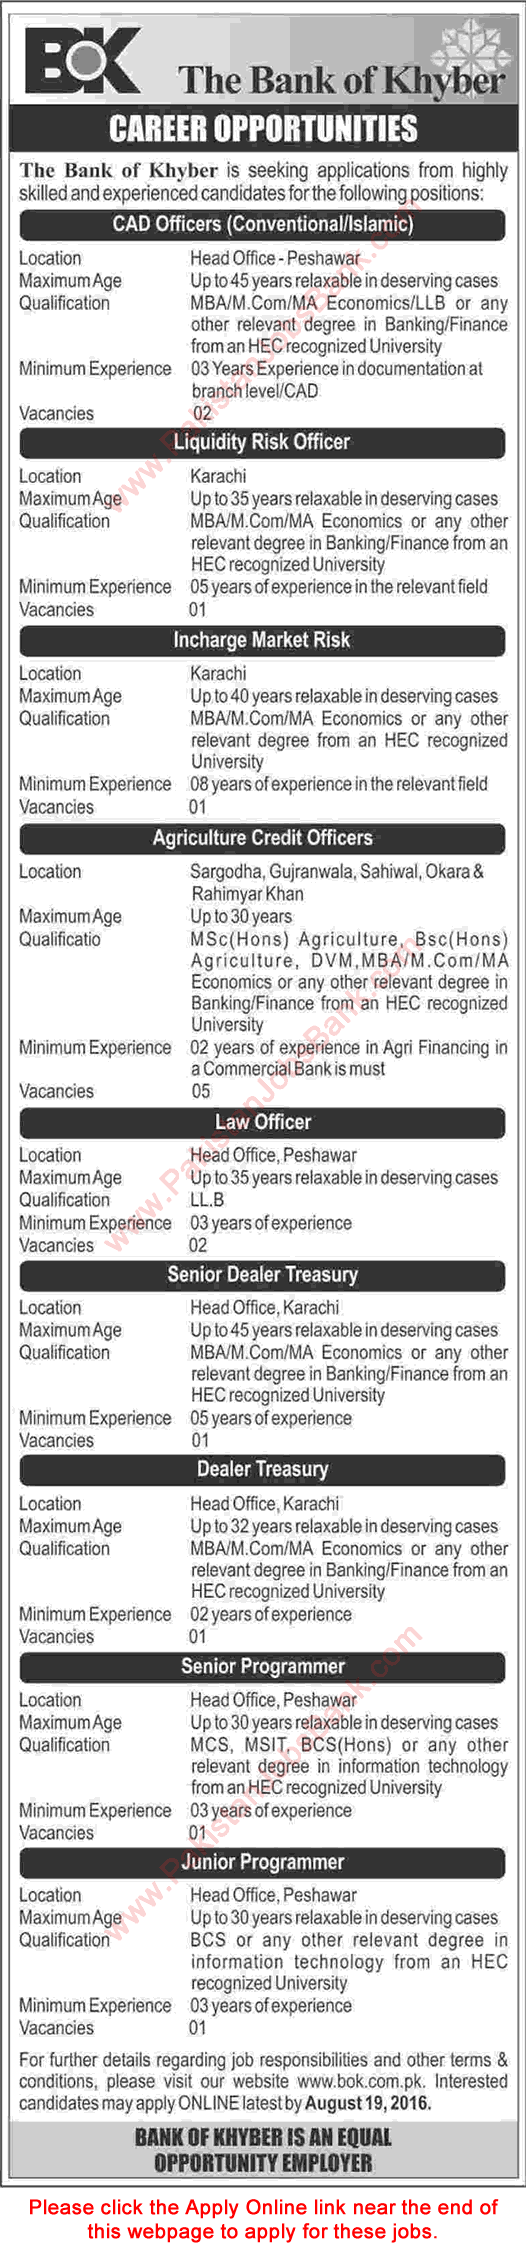 Bank of Khyber Jobs August 2016 BOK Apply Online Agriculture Credit Officers, Programmers & Others Latest